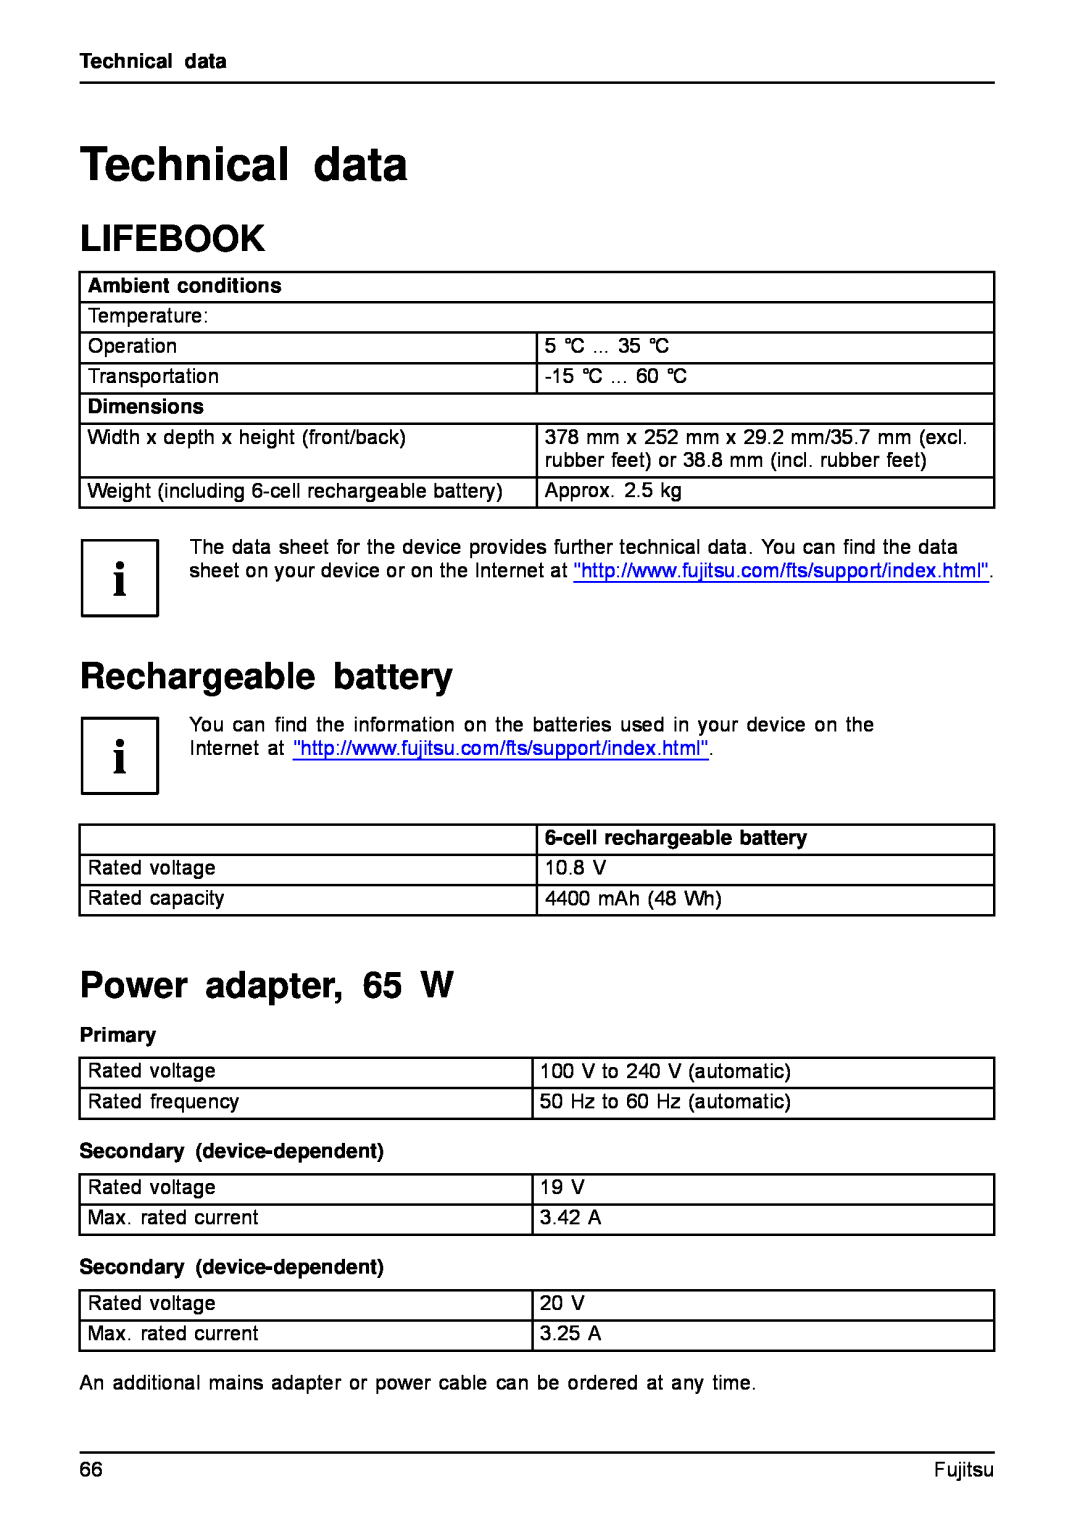 Fujitsu AH512 Technical data, Lifebook, Power adapter, 65 W, Rechargeable battery, Ambient conditions, Dimensions, Primary 